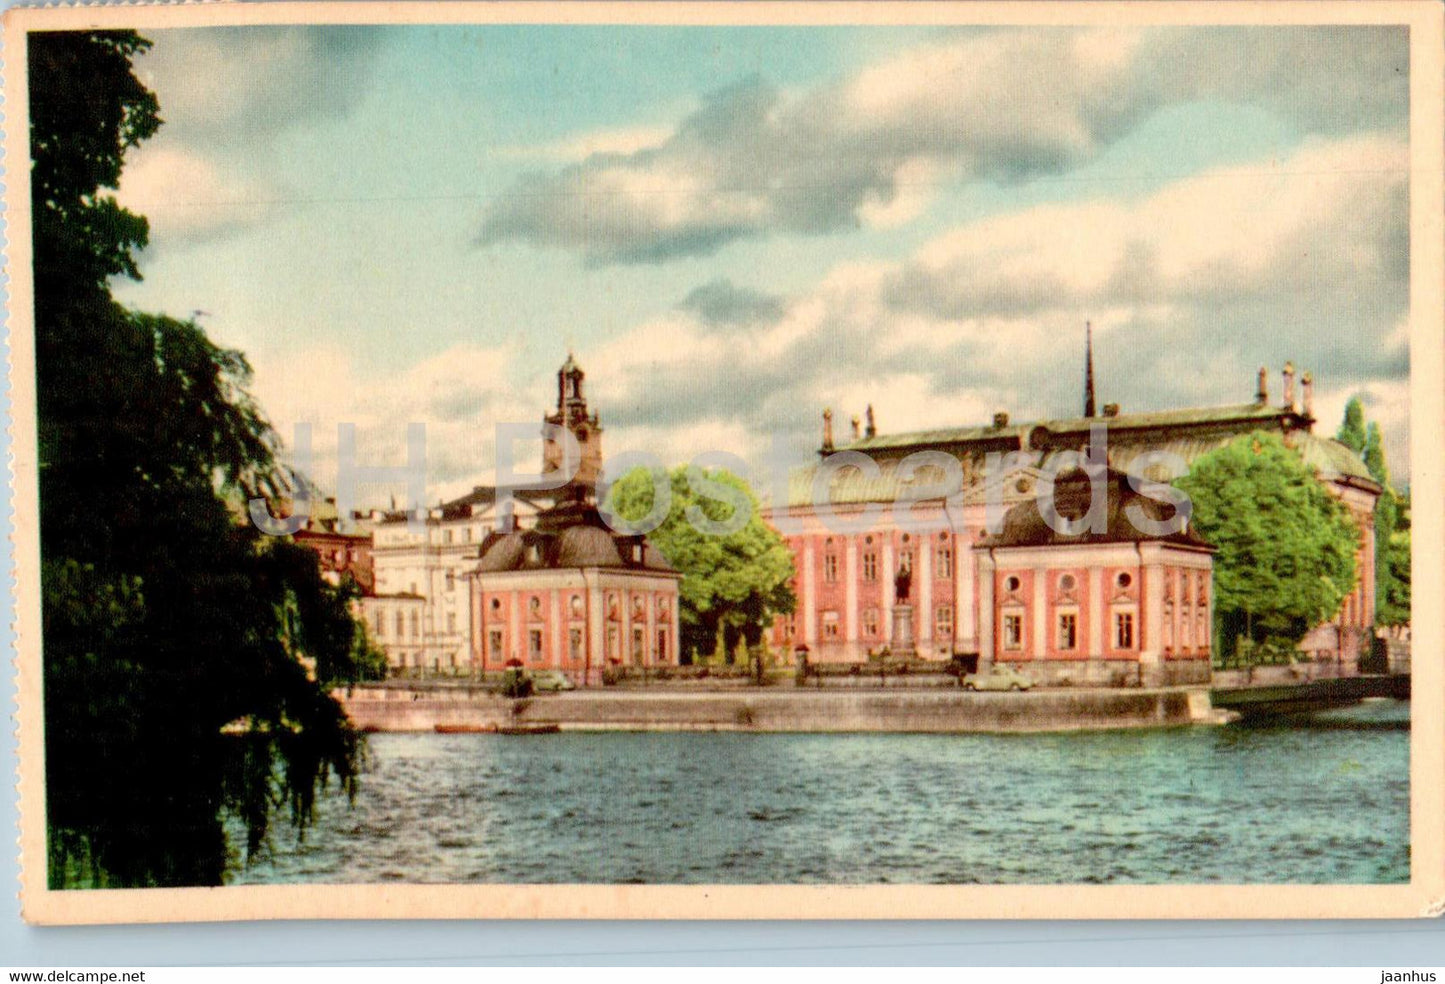 Stockholm - Riddarhuset med Storkyrkan - The Knight's House with the Great Church - old postcard - 108 - Sweden - used - JH Postcards